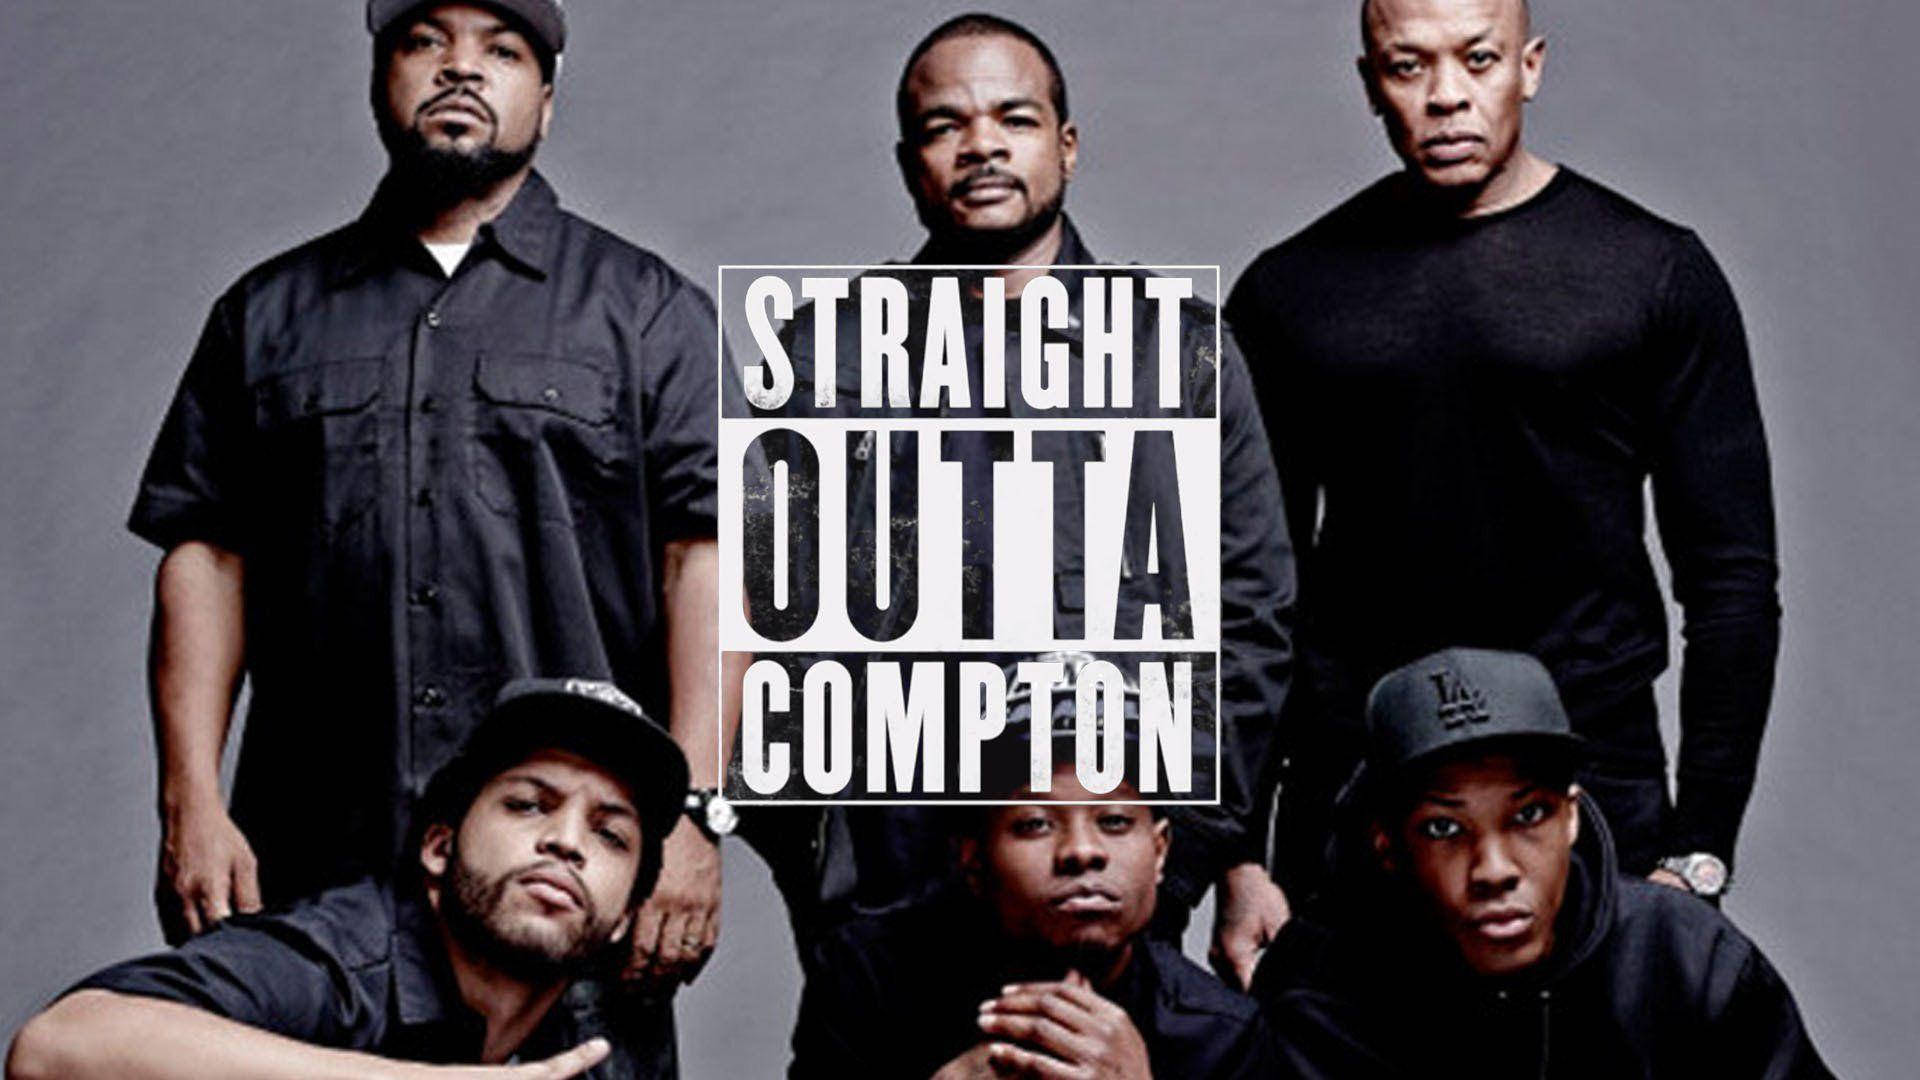 N.w.a. Straight Outta Compton 2015 Film Poster Wallpaper